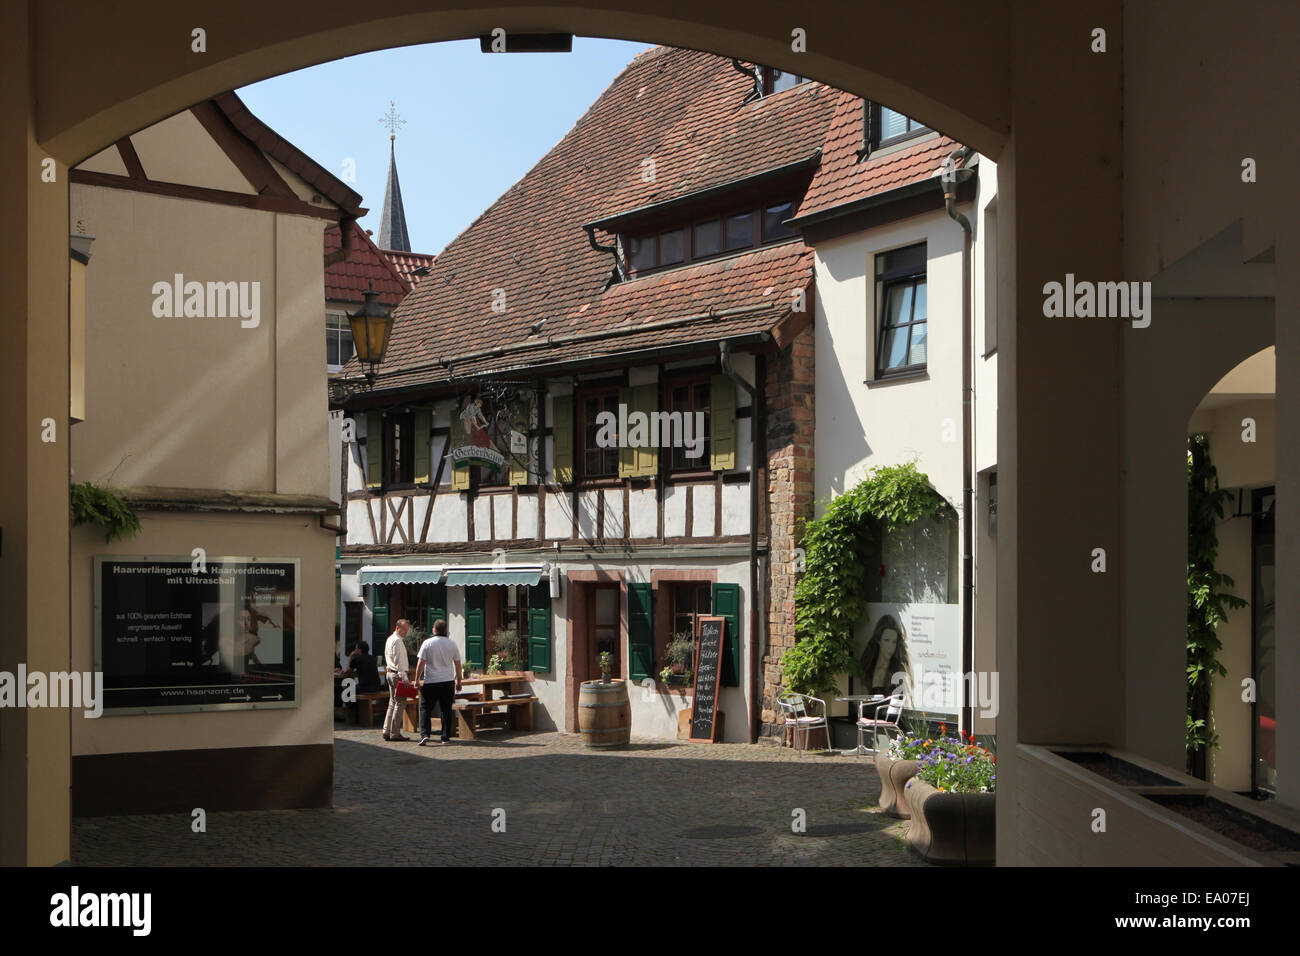 Entrance to the medieval town in Neustadt an der Weinstrasse, Baden-Wurttemberg, Germany. Stock Photo